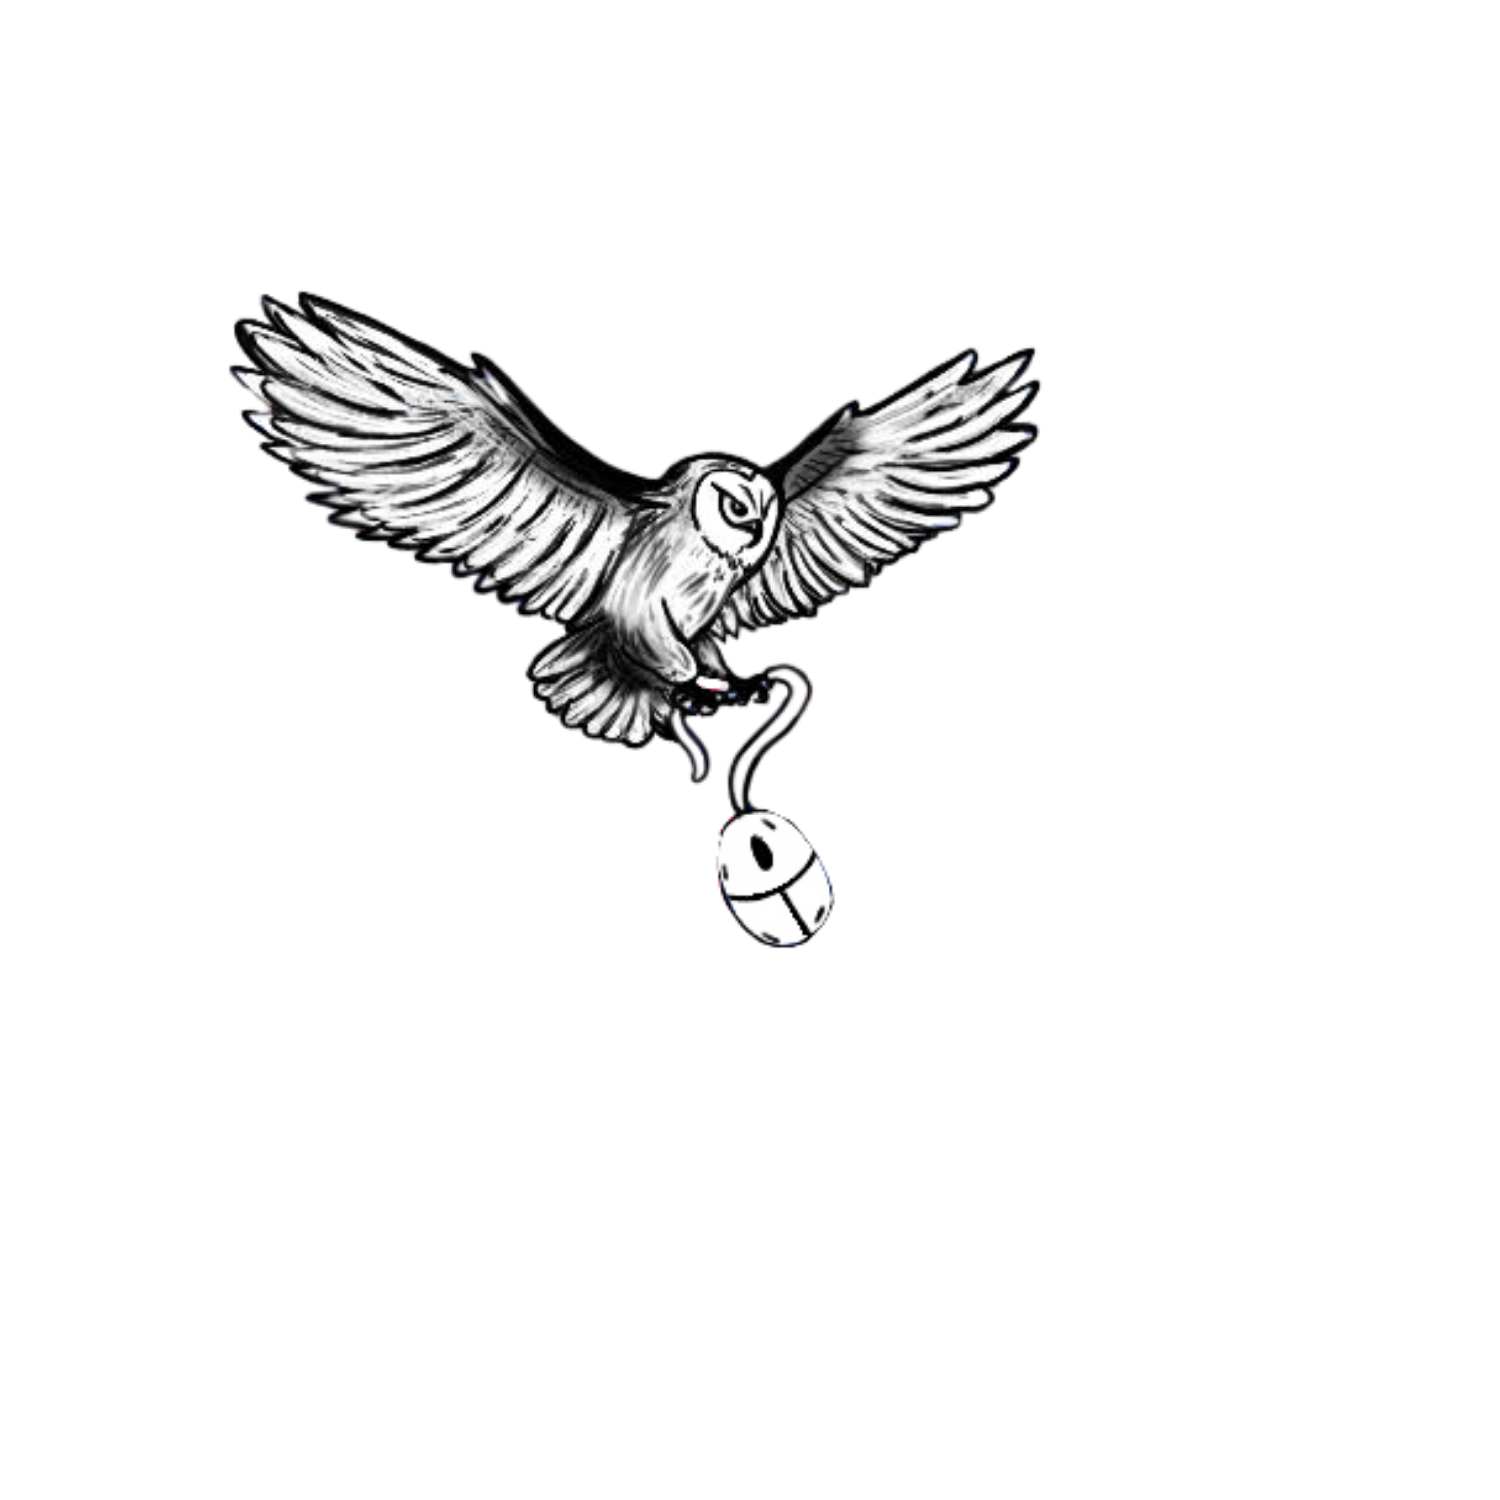 Moss-Card Consulting